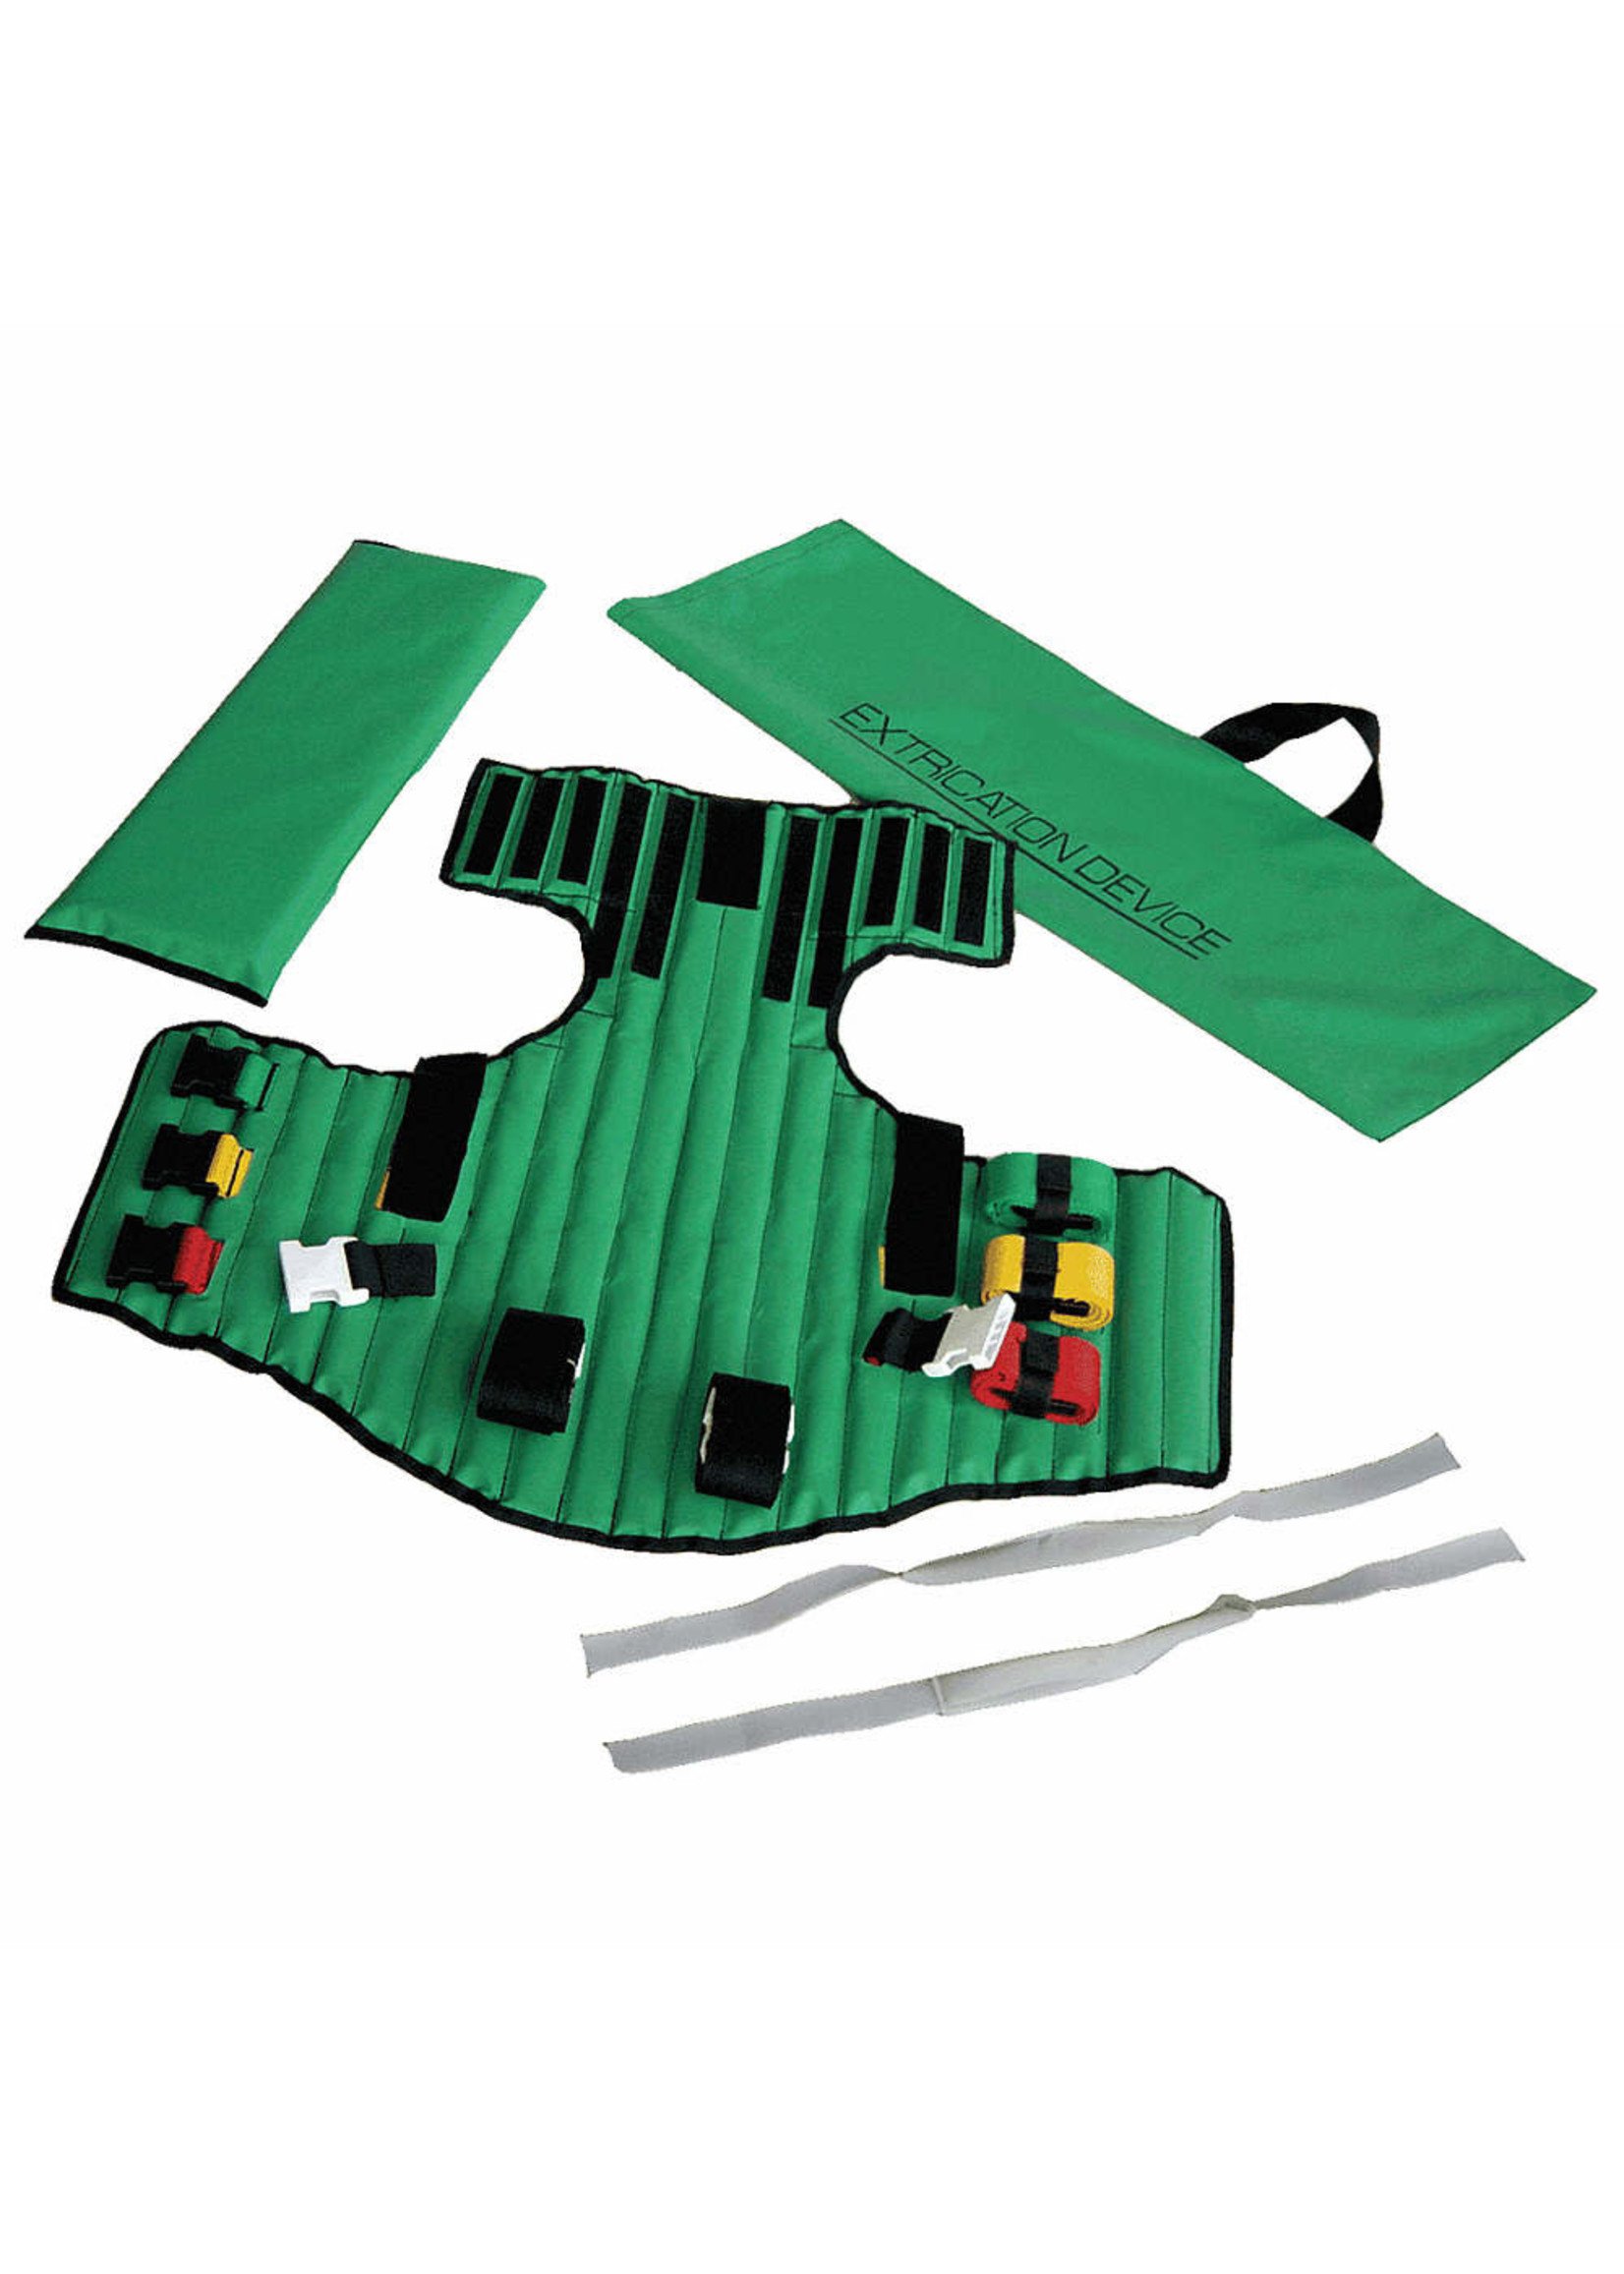 Extrication Device Medsource Green